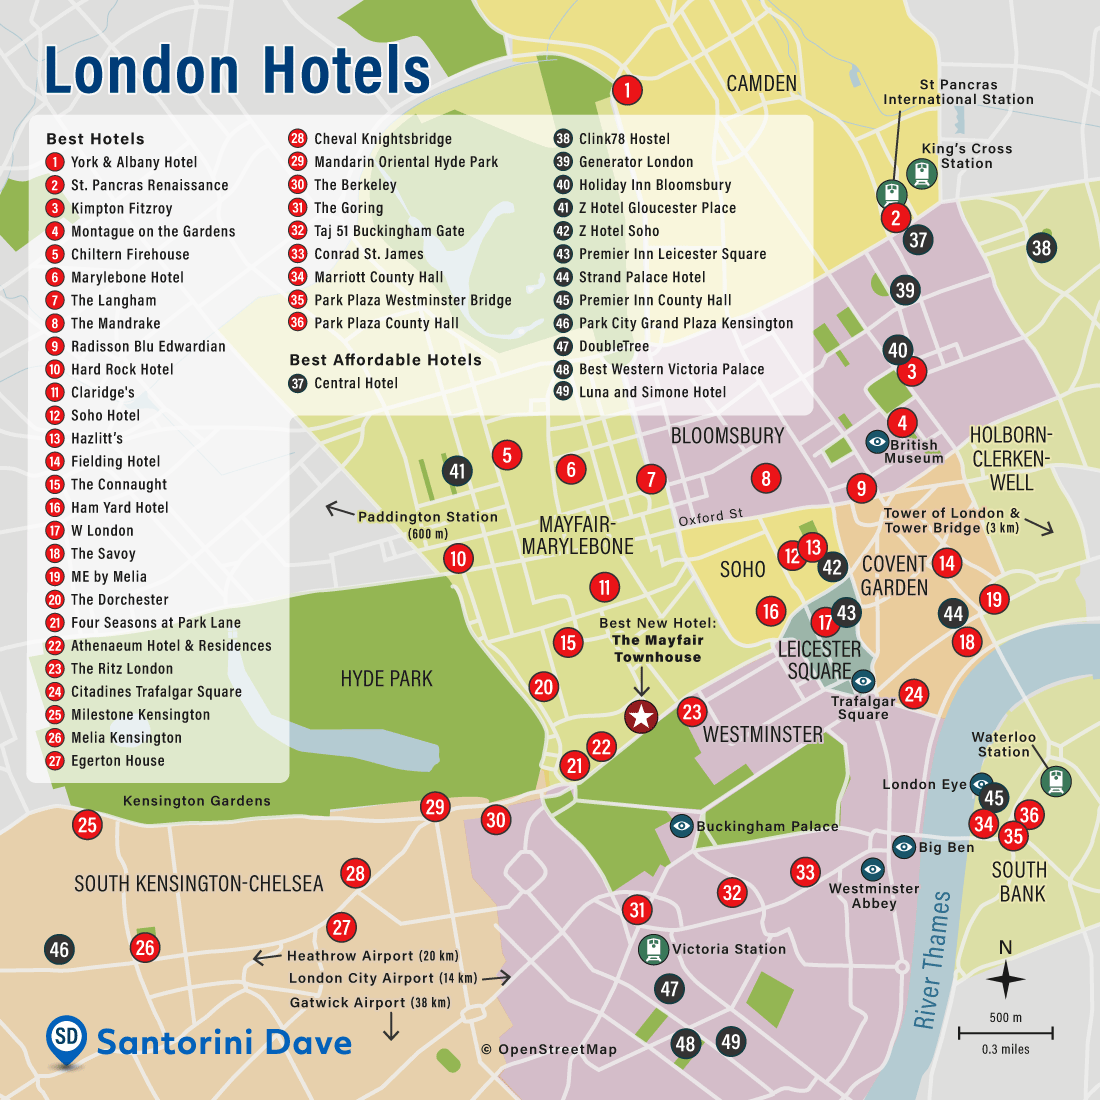 Map of the best and affordable London Hotels